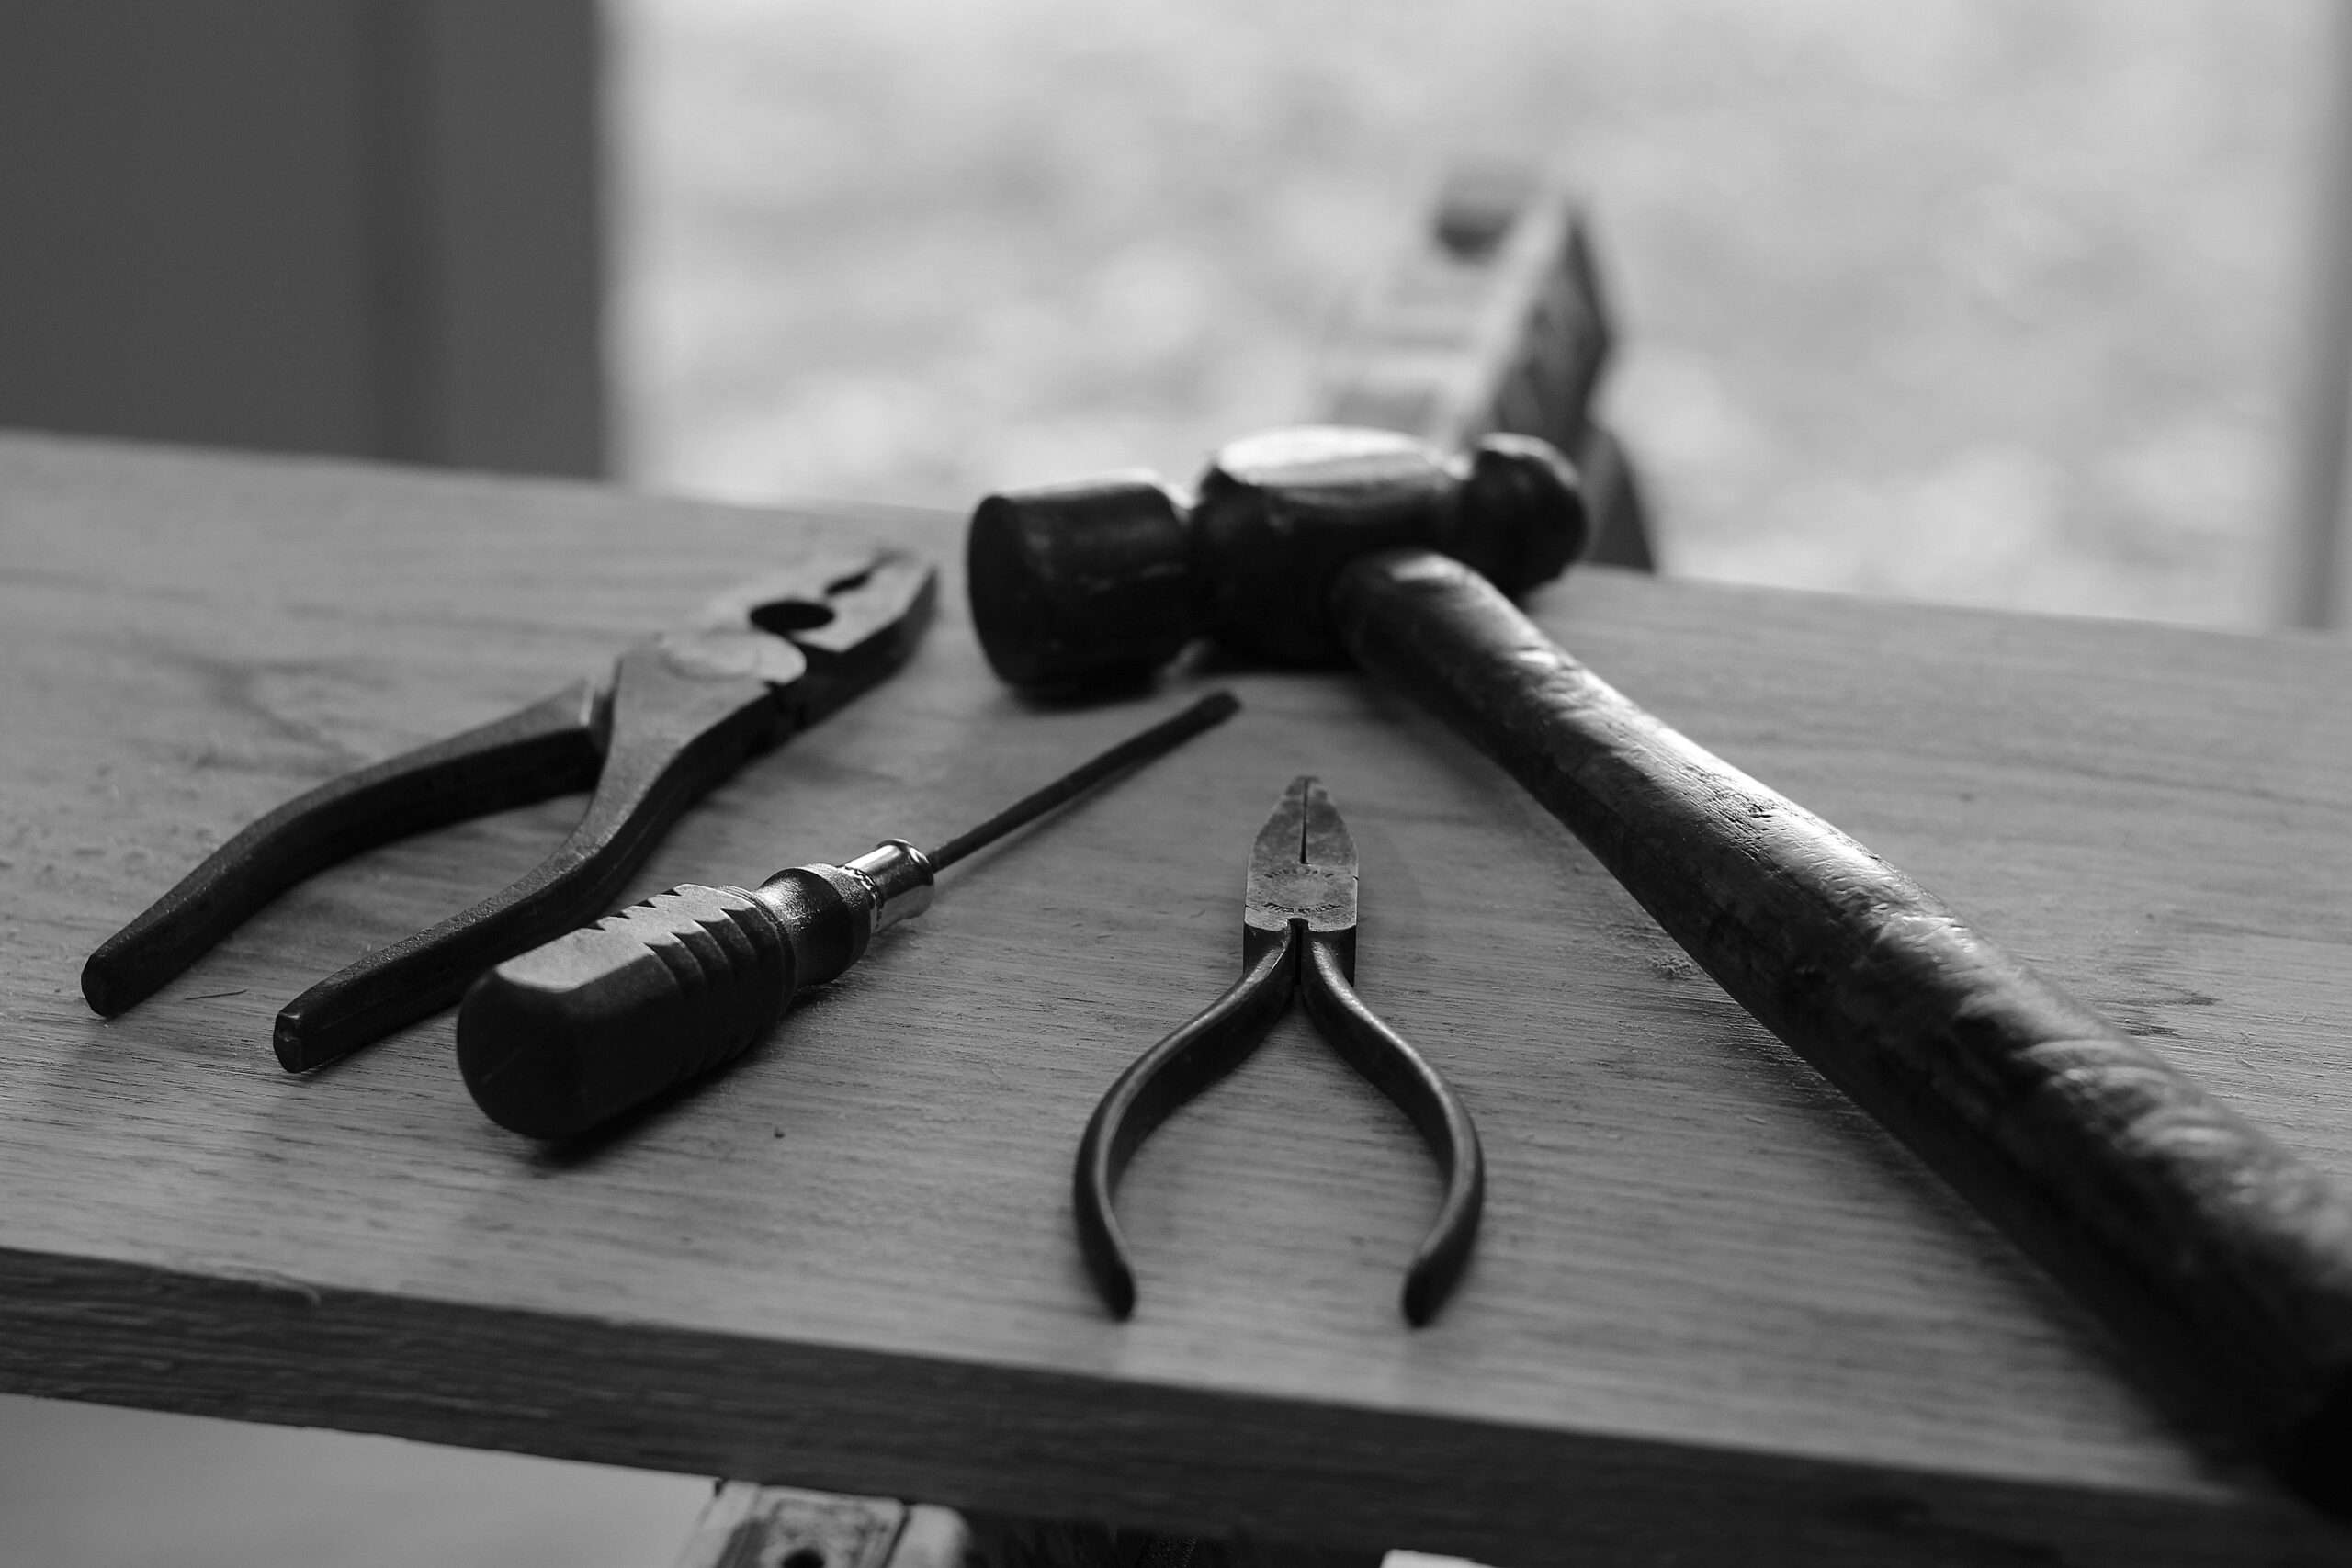 Repair tools on a table